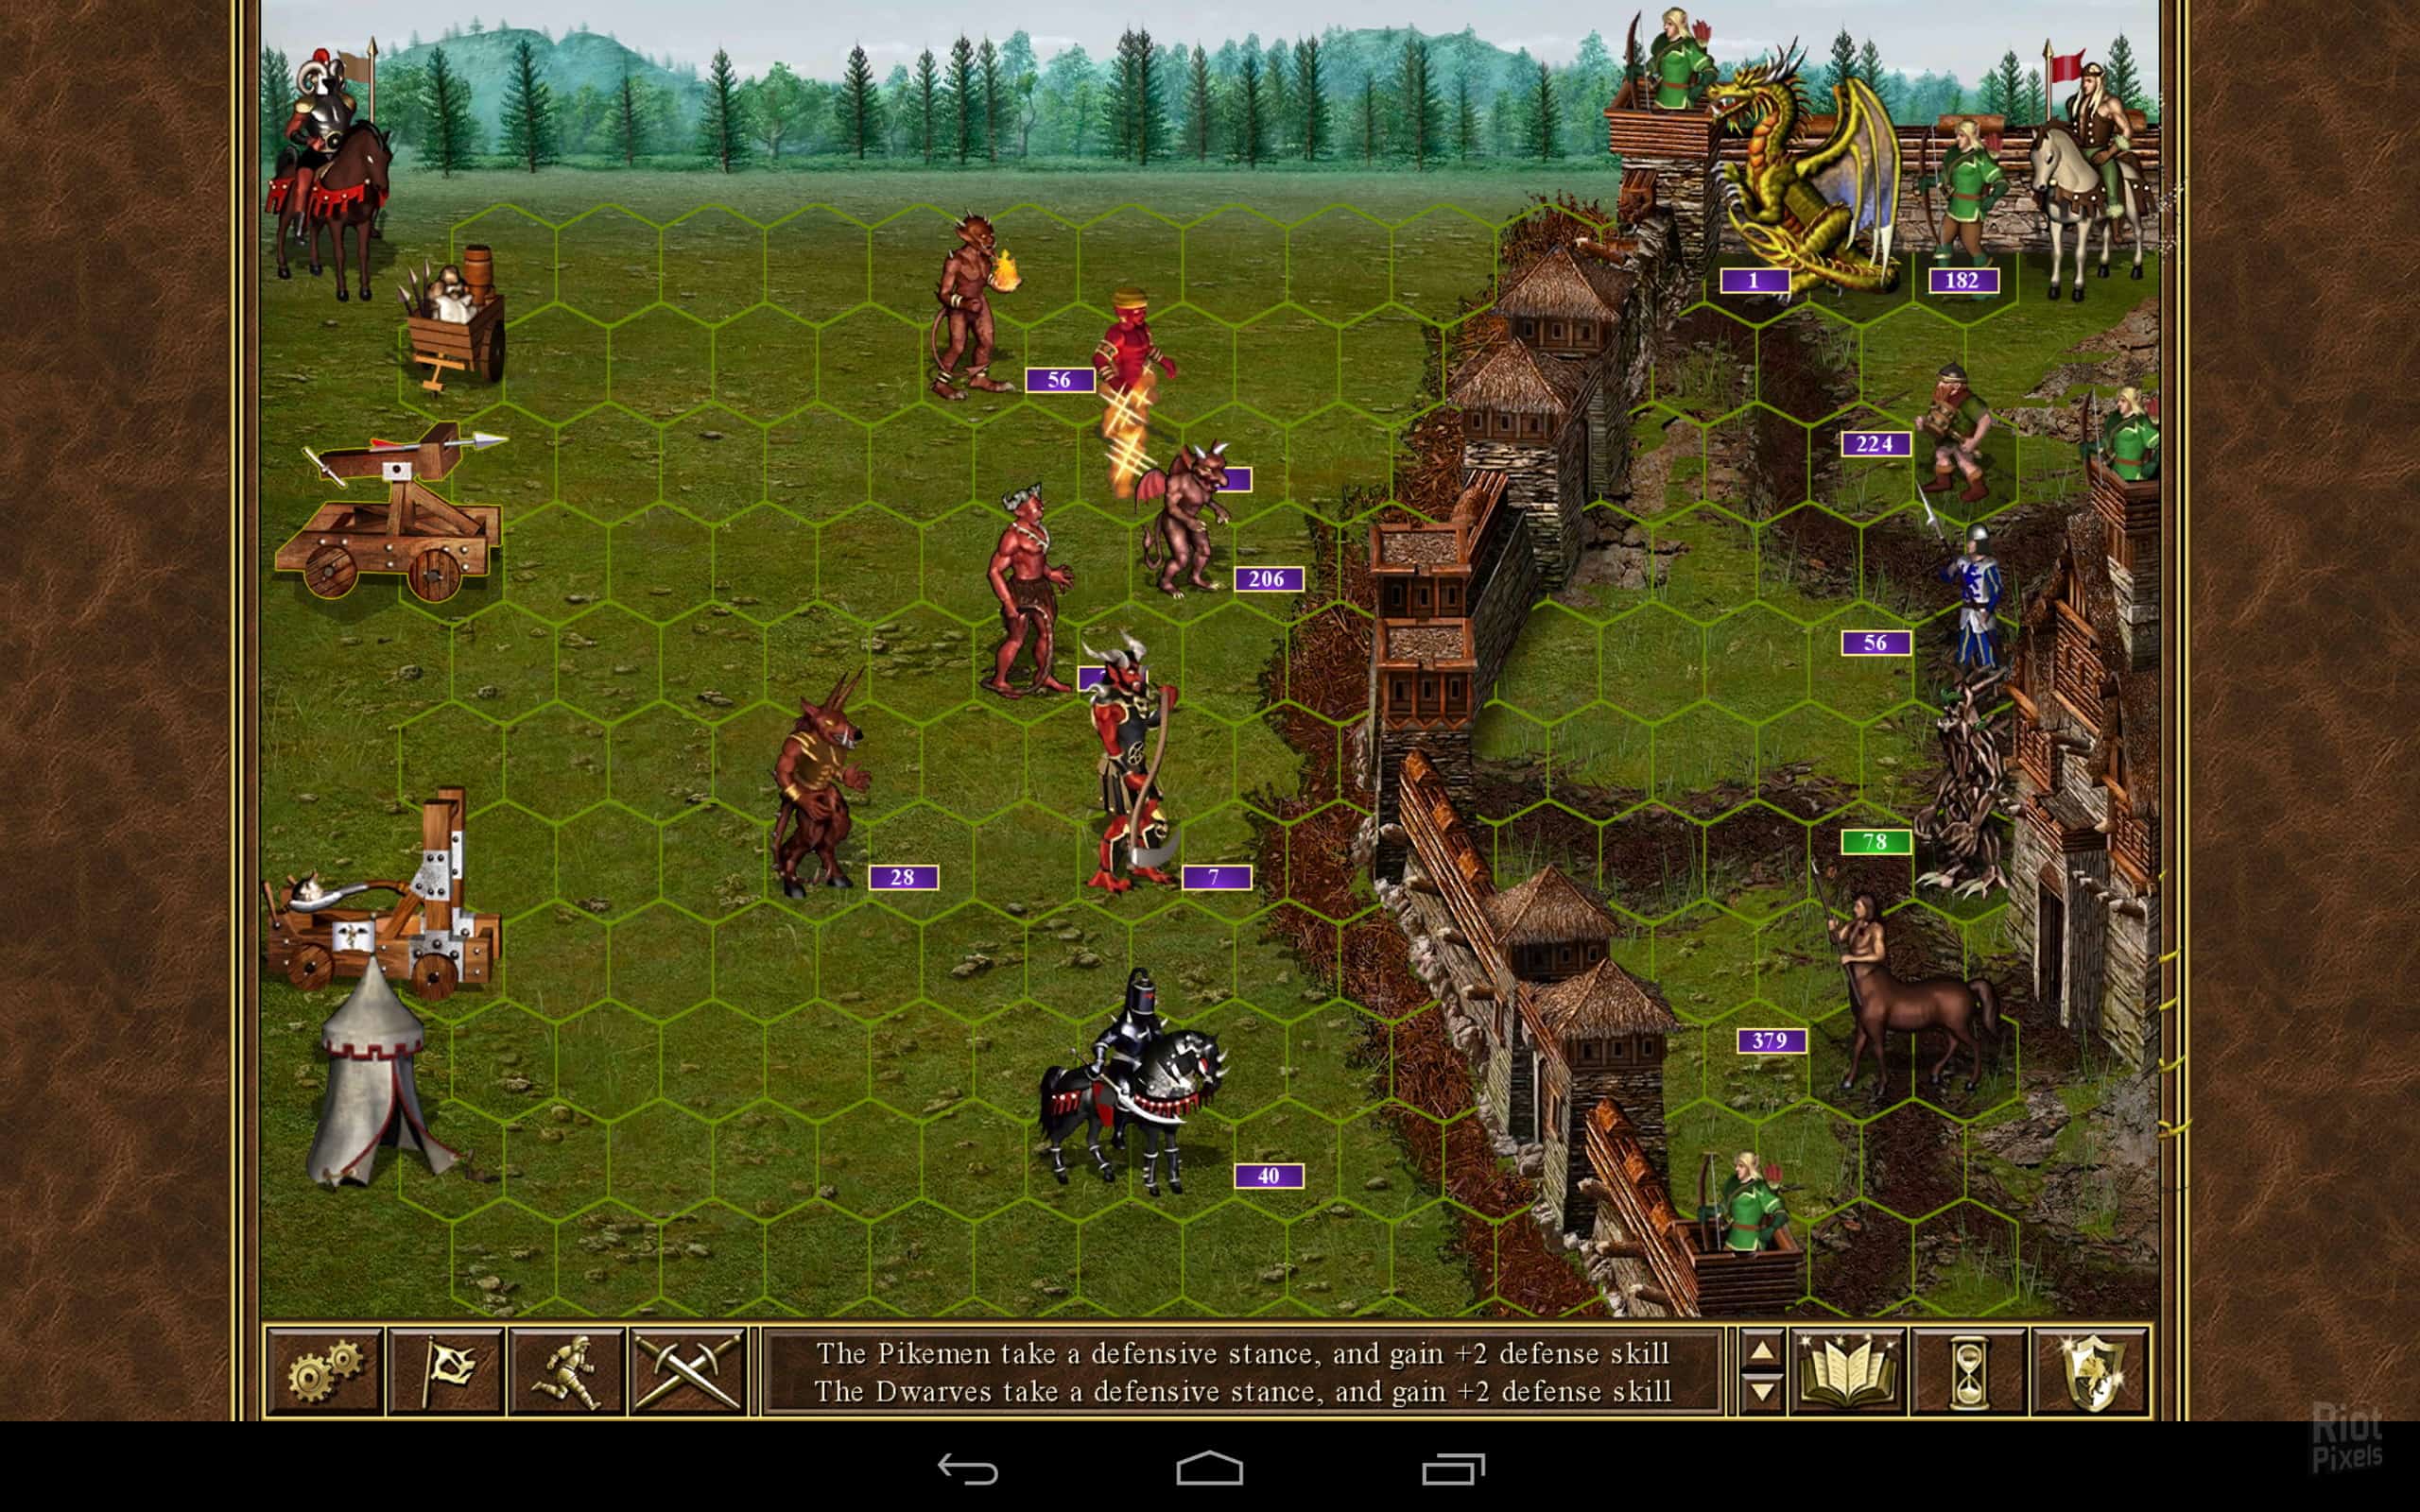 download heroes of might and magic 3